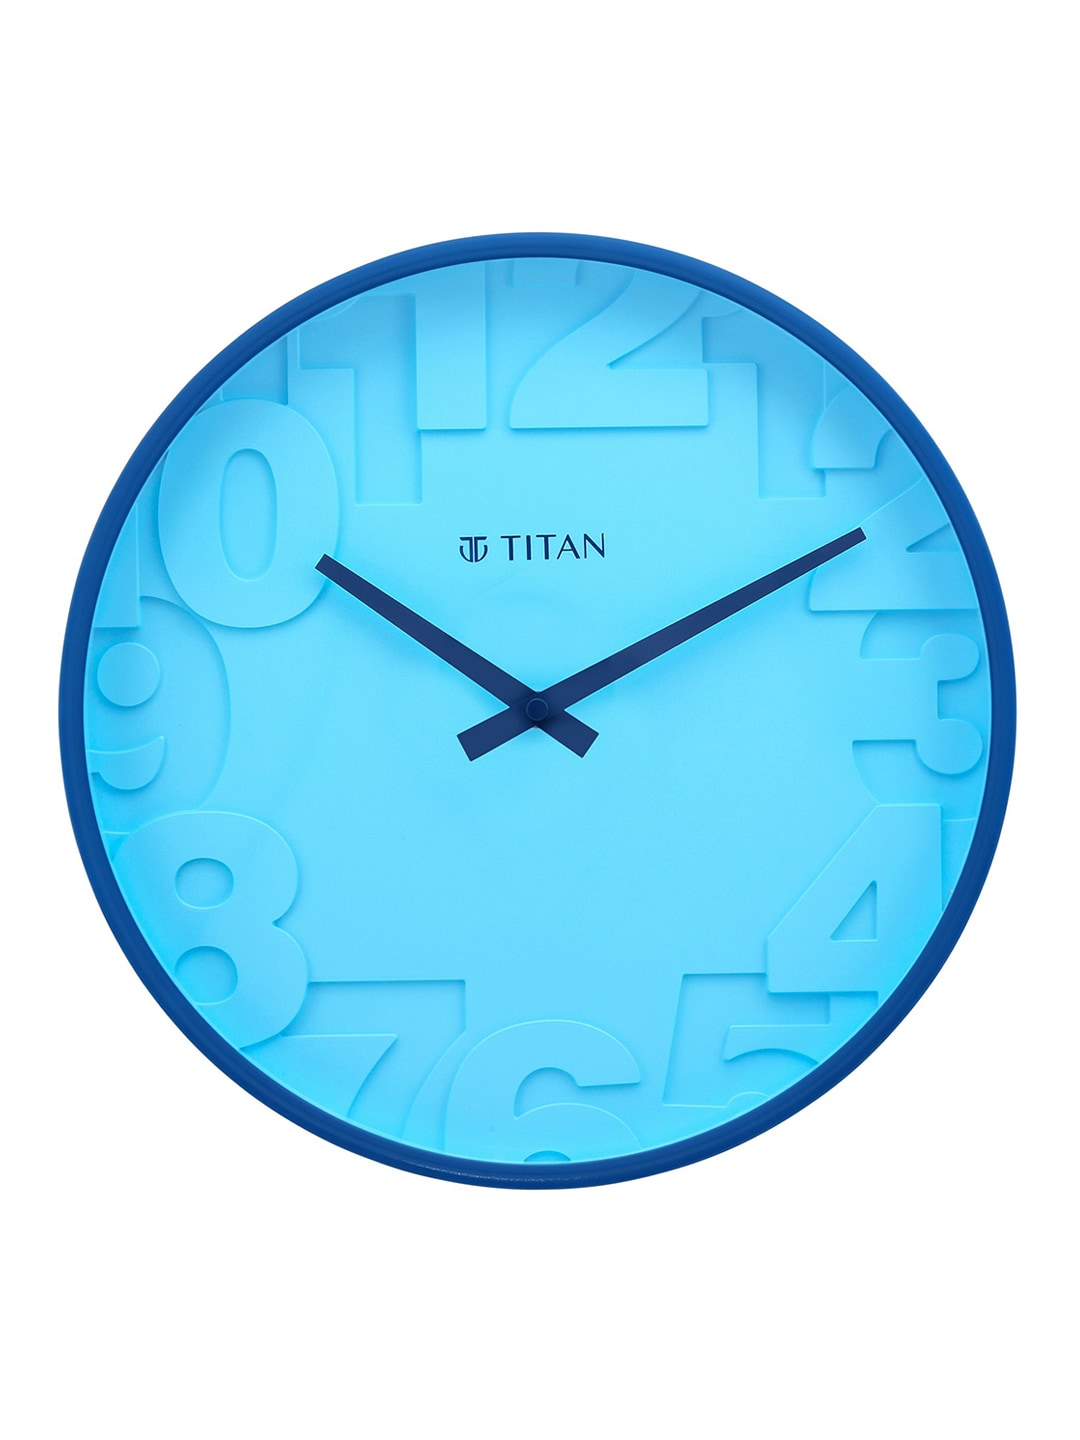 Titan Blue Analogue Contemporary Wall Clock Price in India